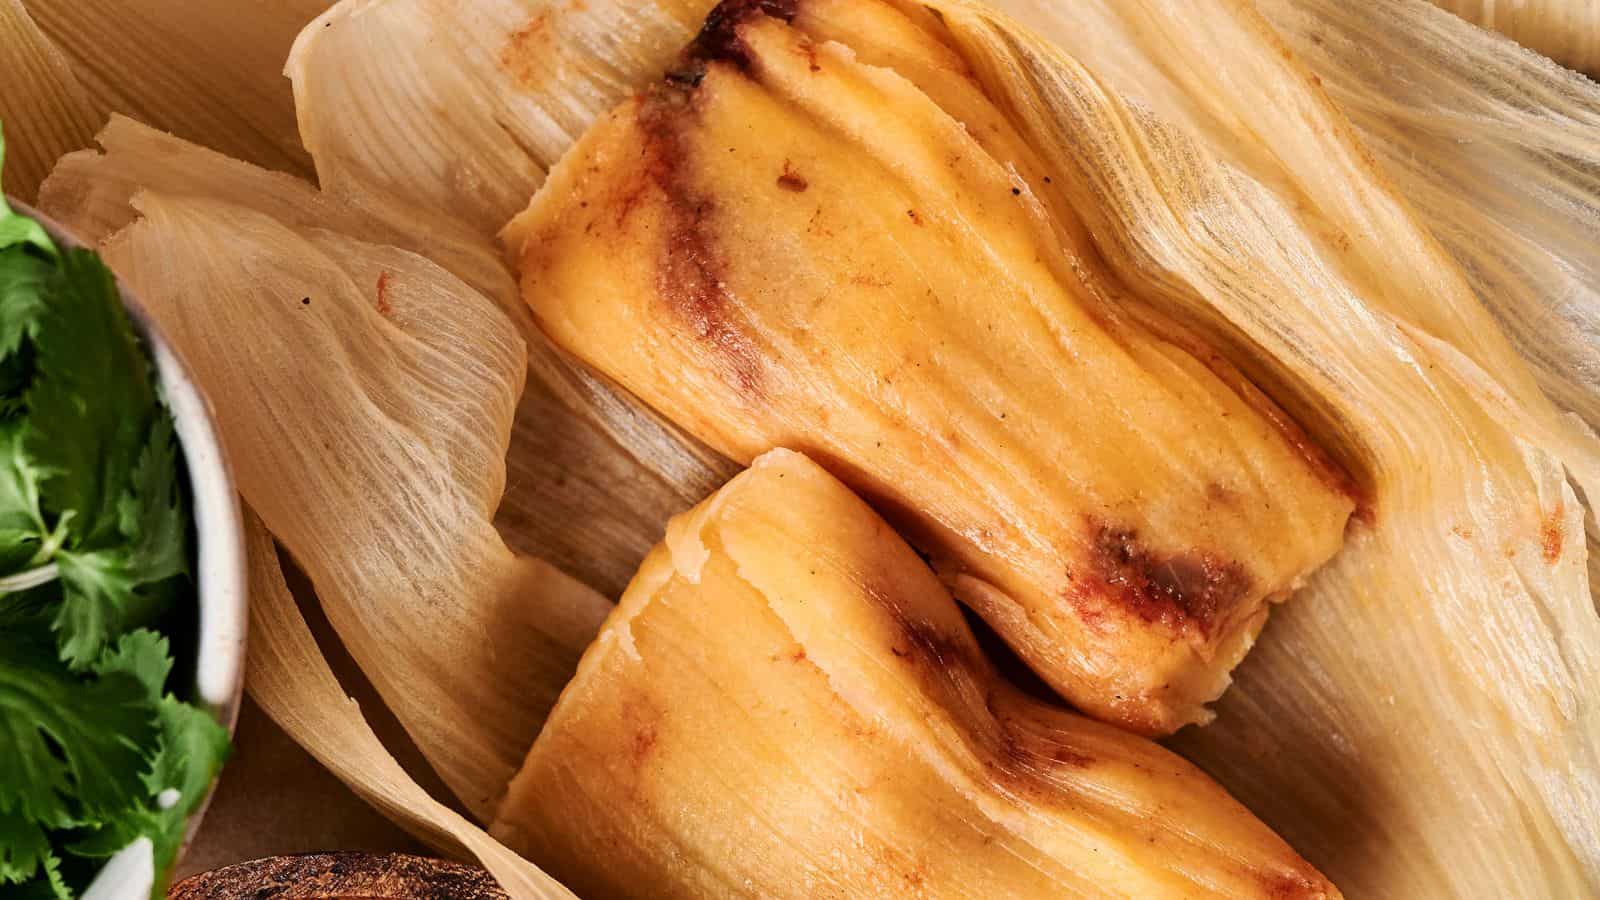 Two cooked tamales nestled in corn husks, with a bowl of fresh cilantro partially visible on the left side.